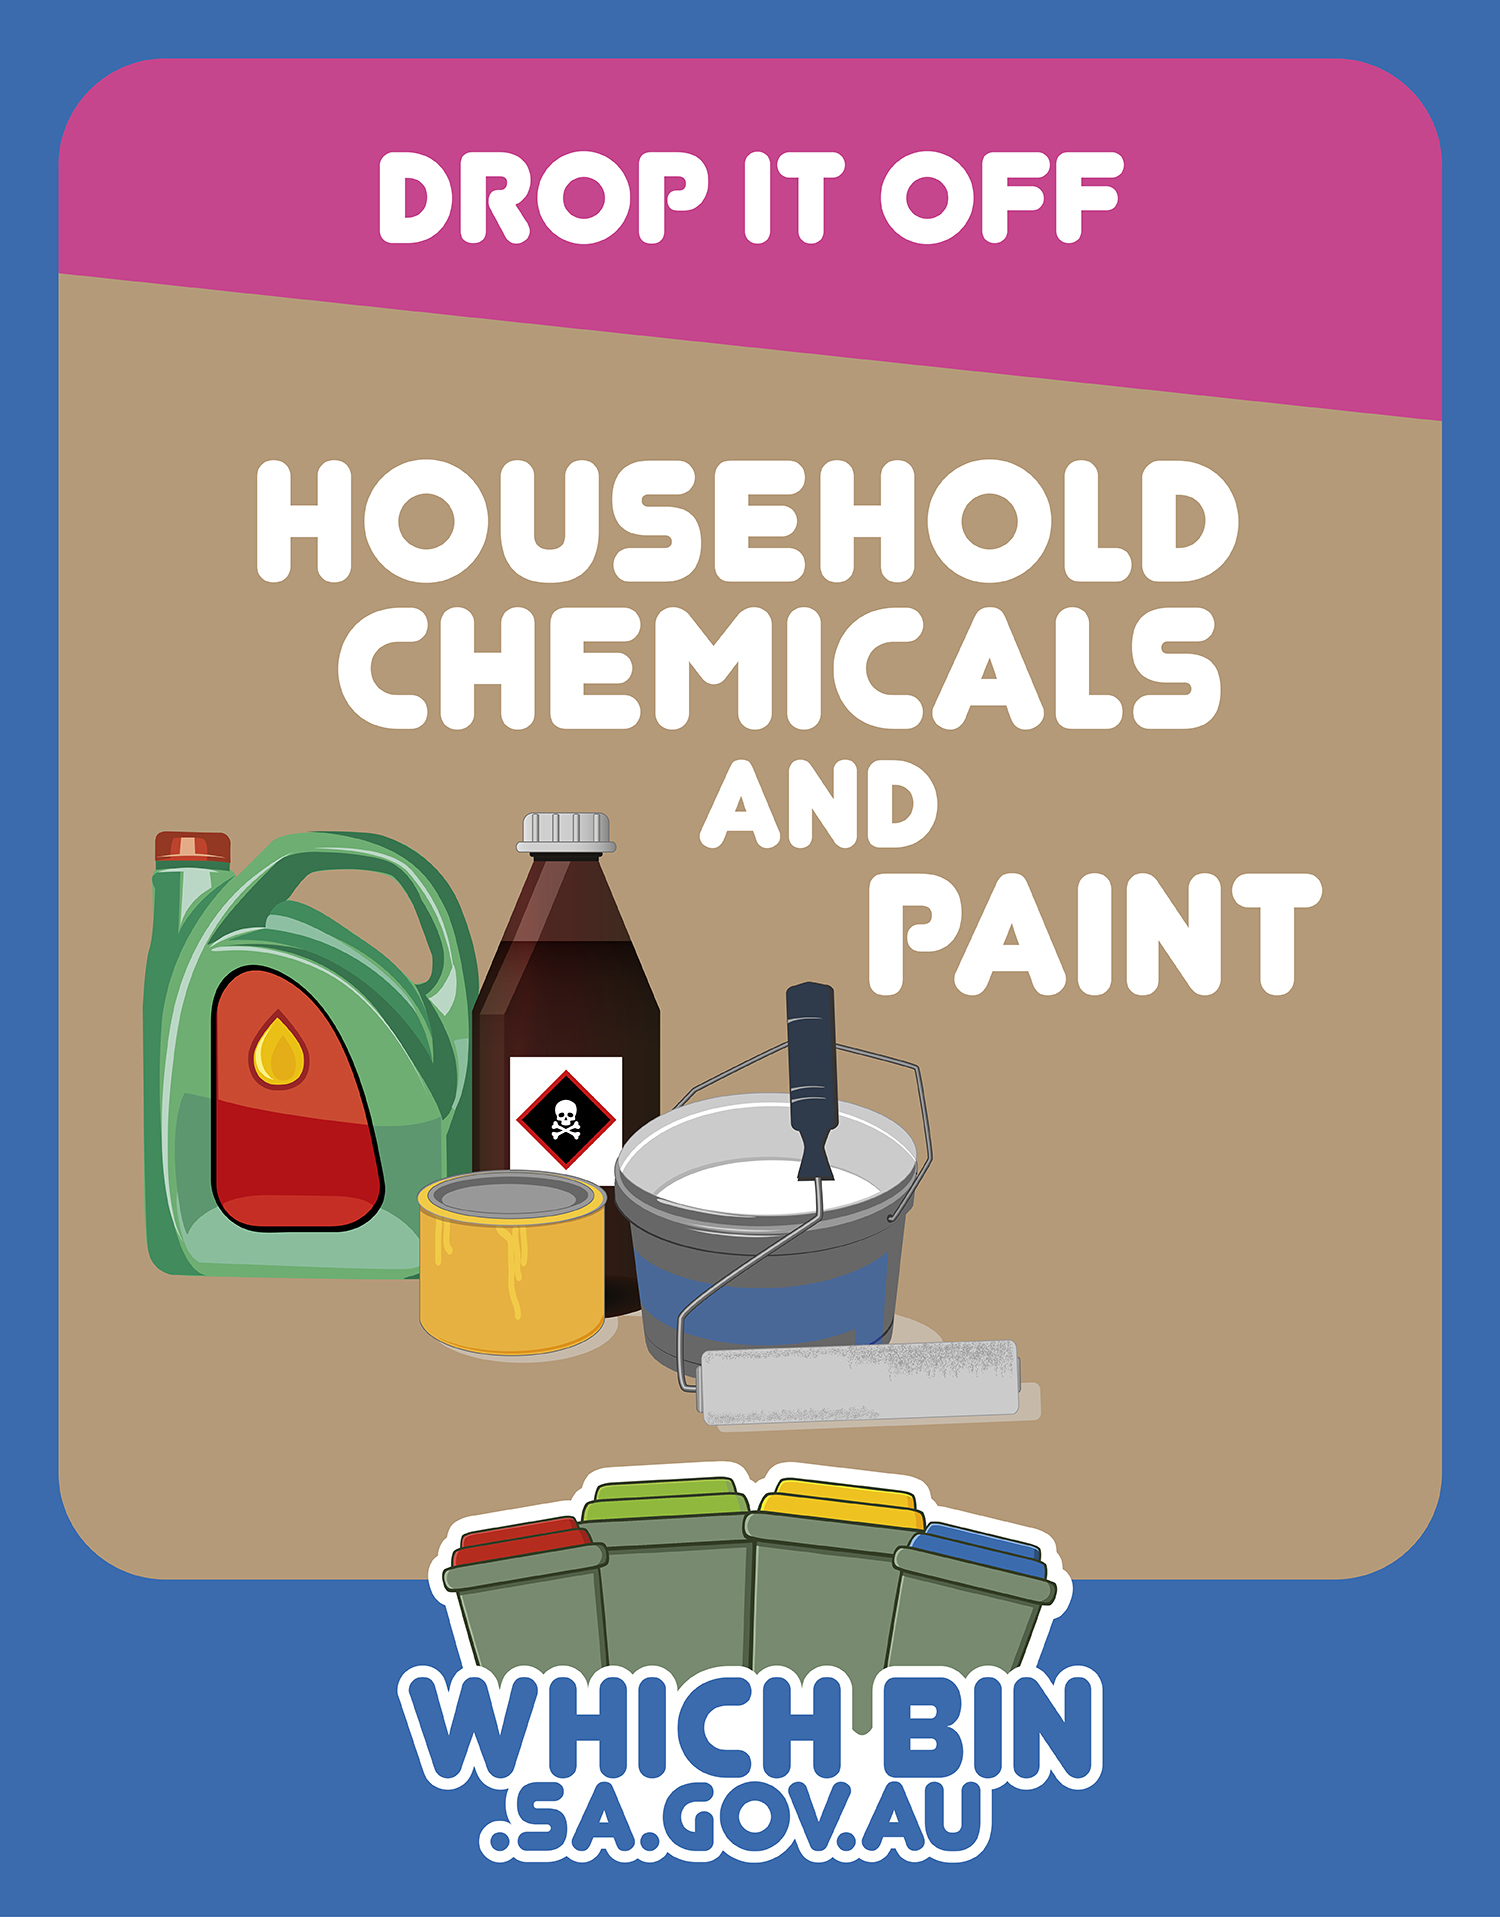 Drop it off: household chemicals and paint